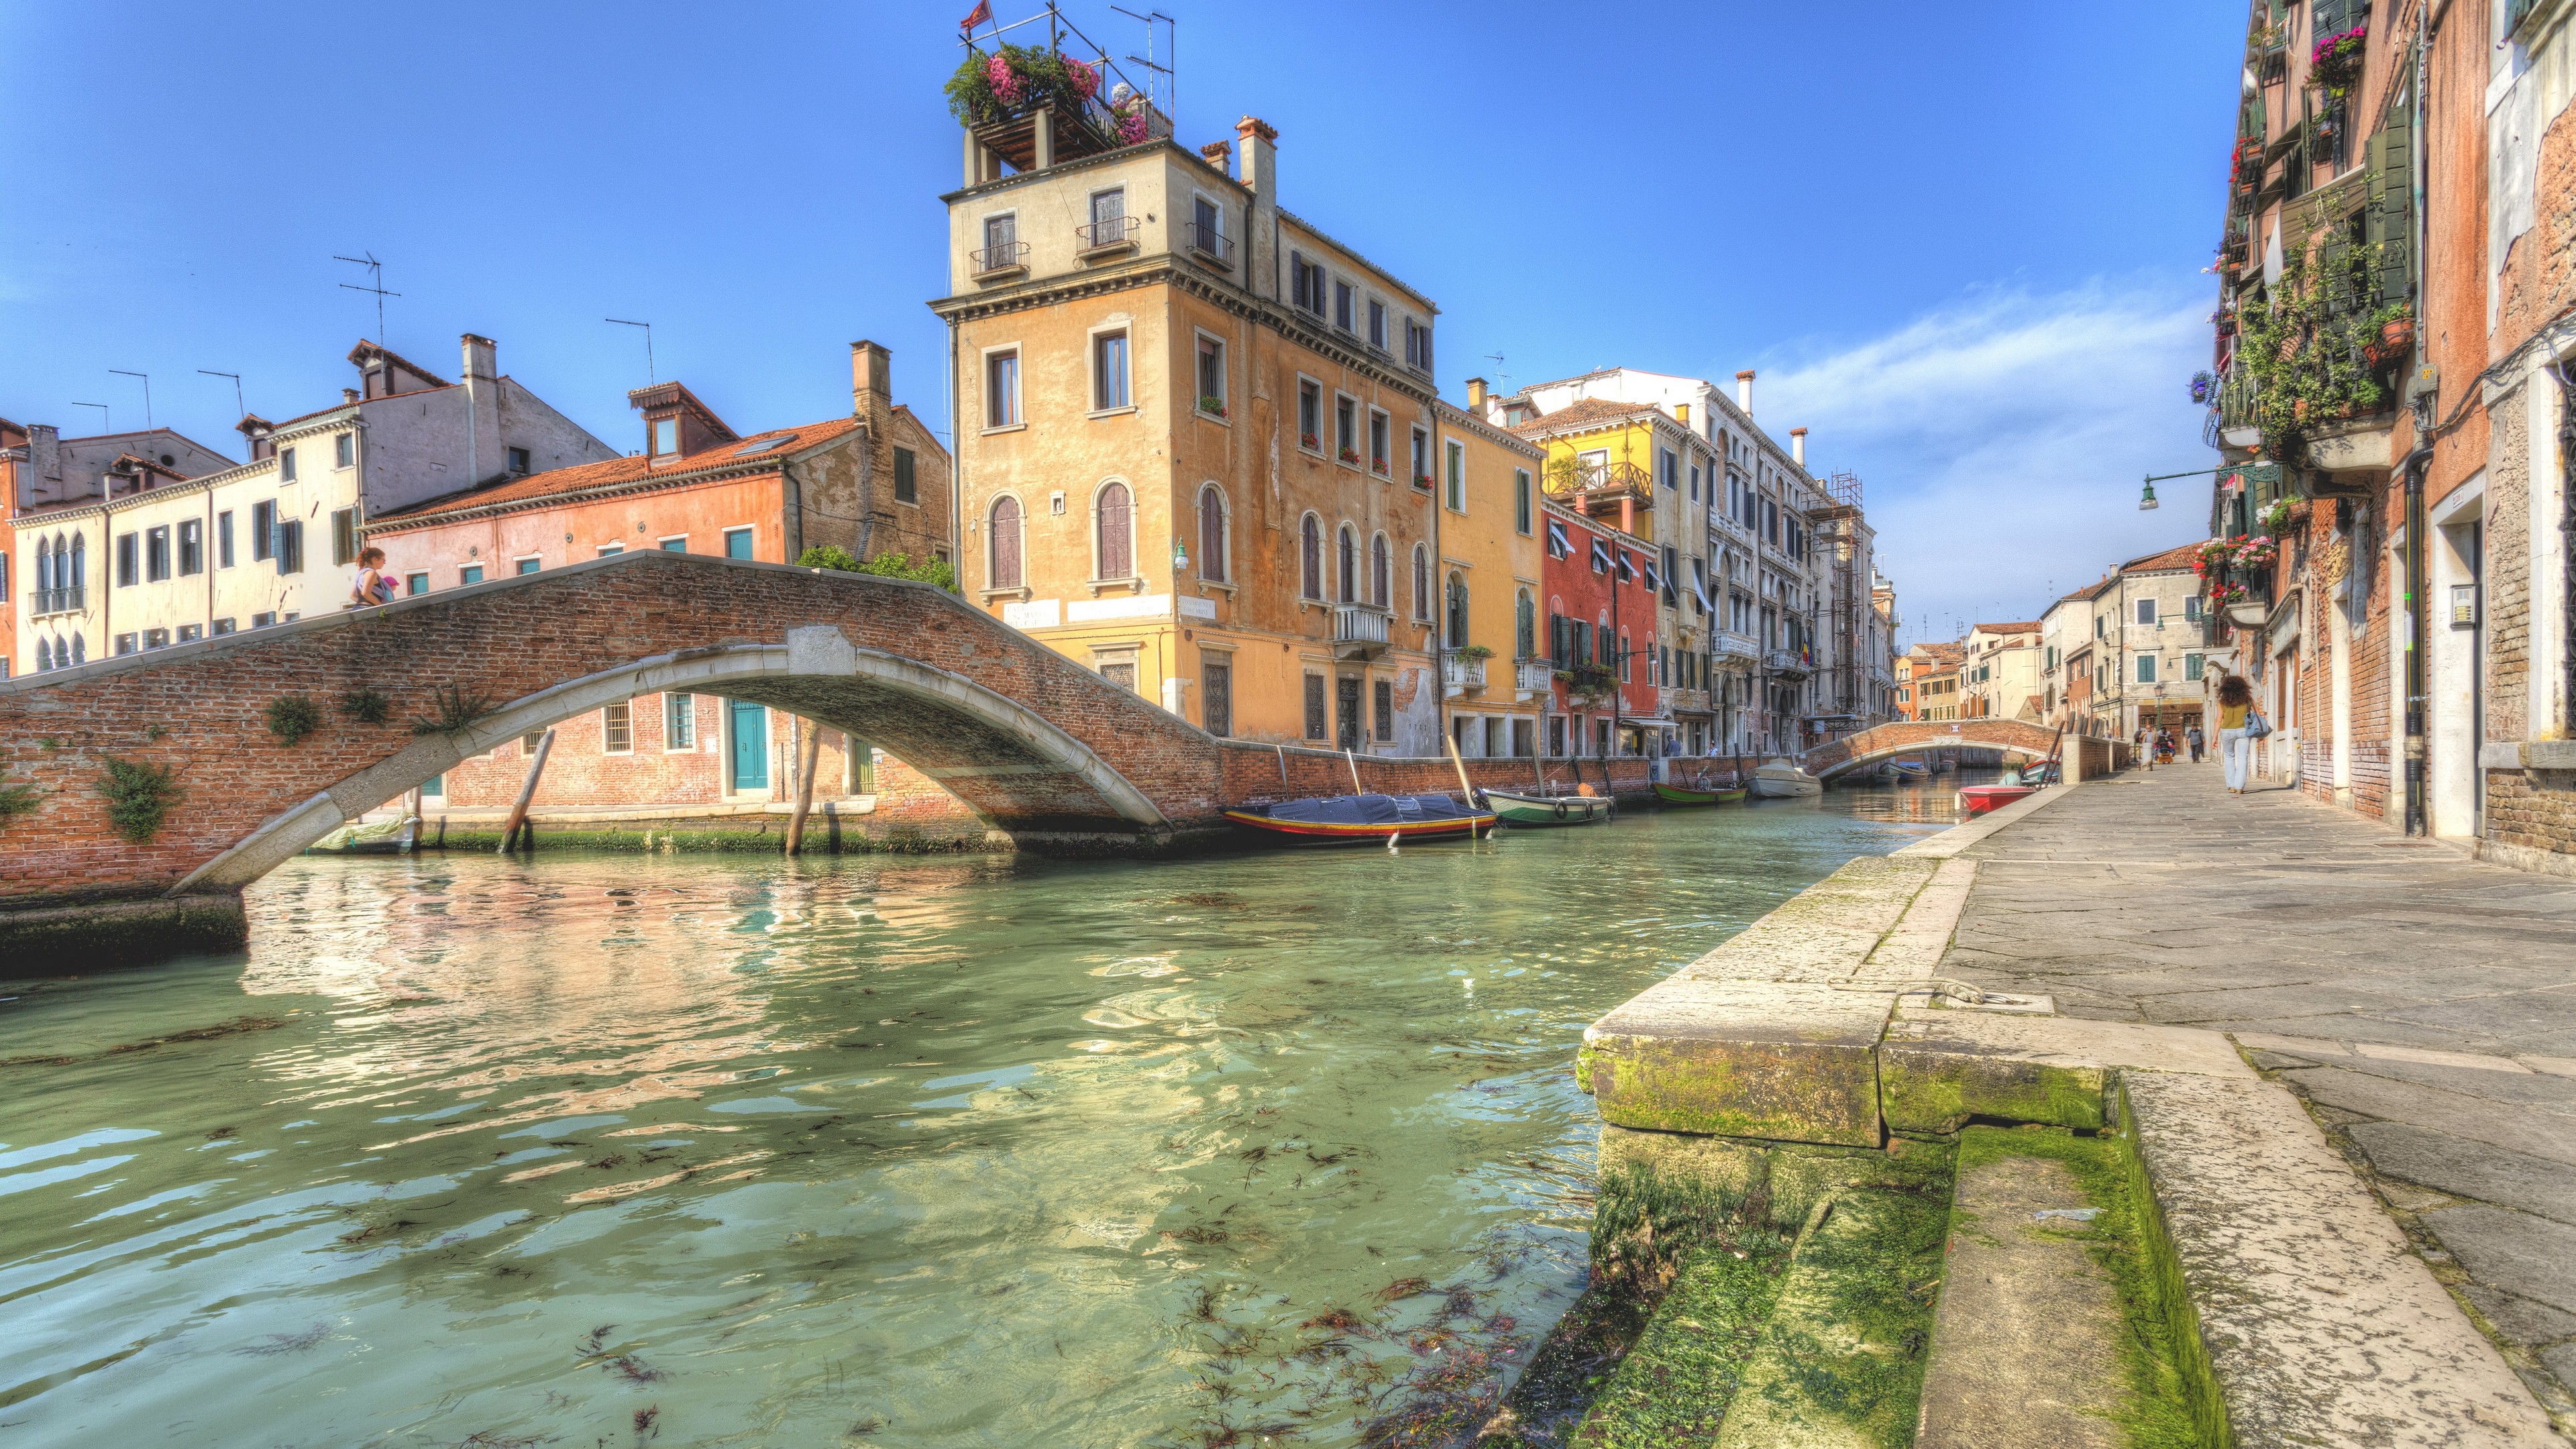 General 3840x2160 architecture building old building water Venice Italy bridge street history boat